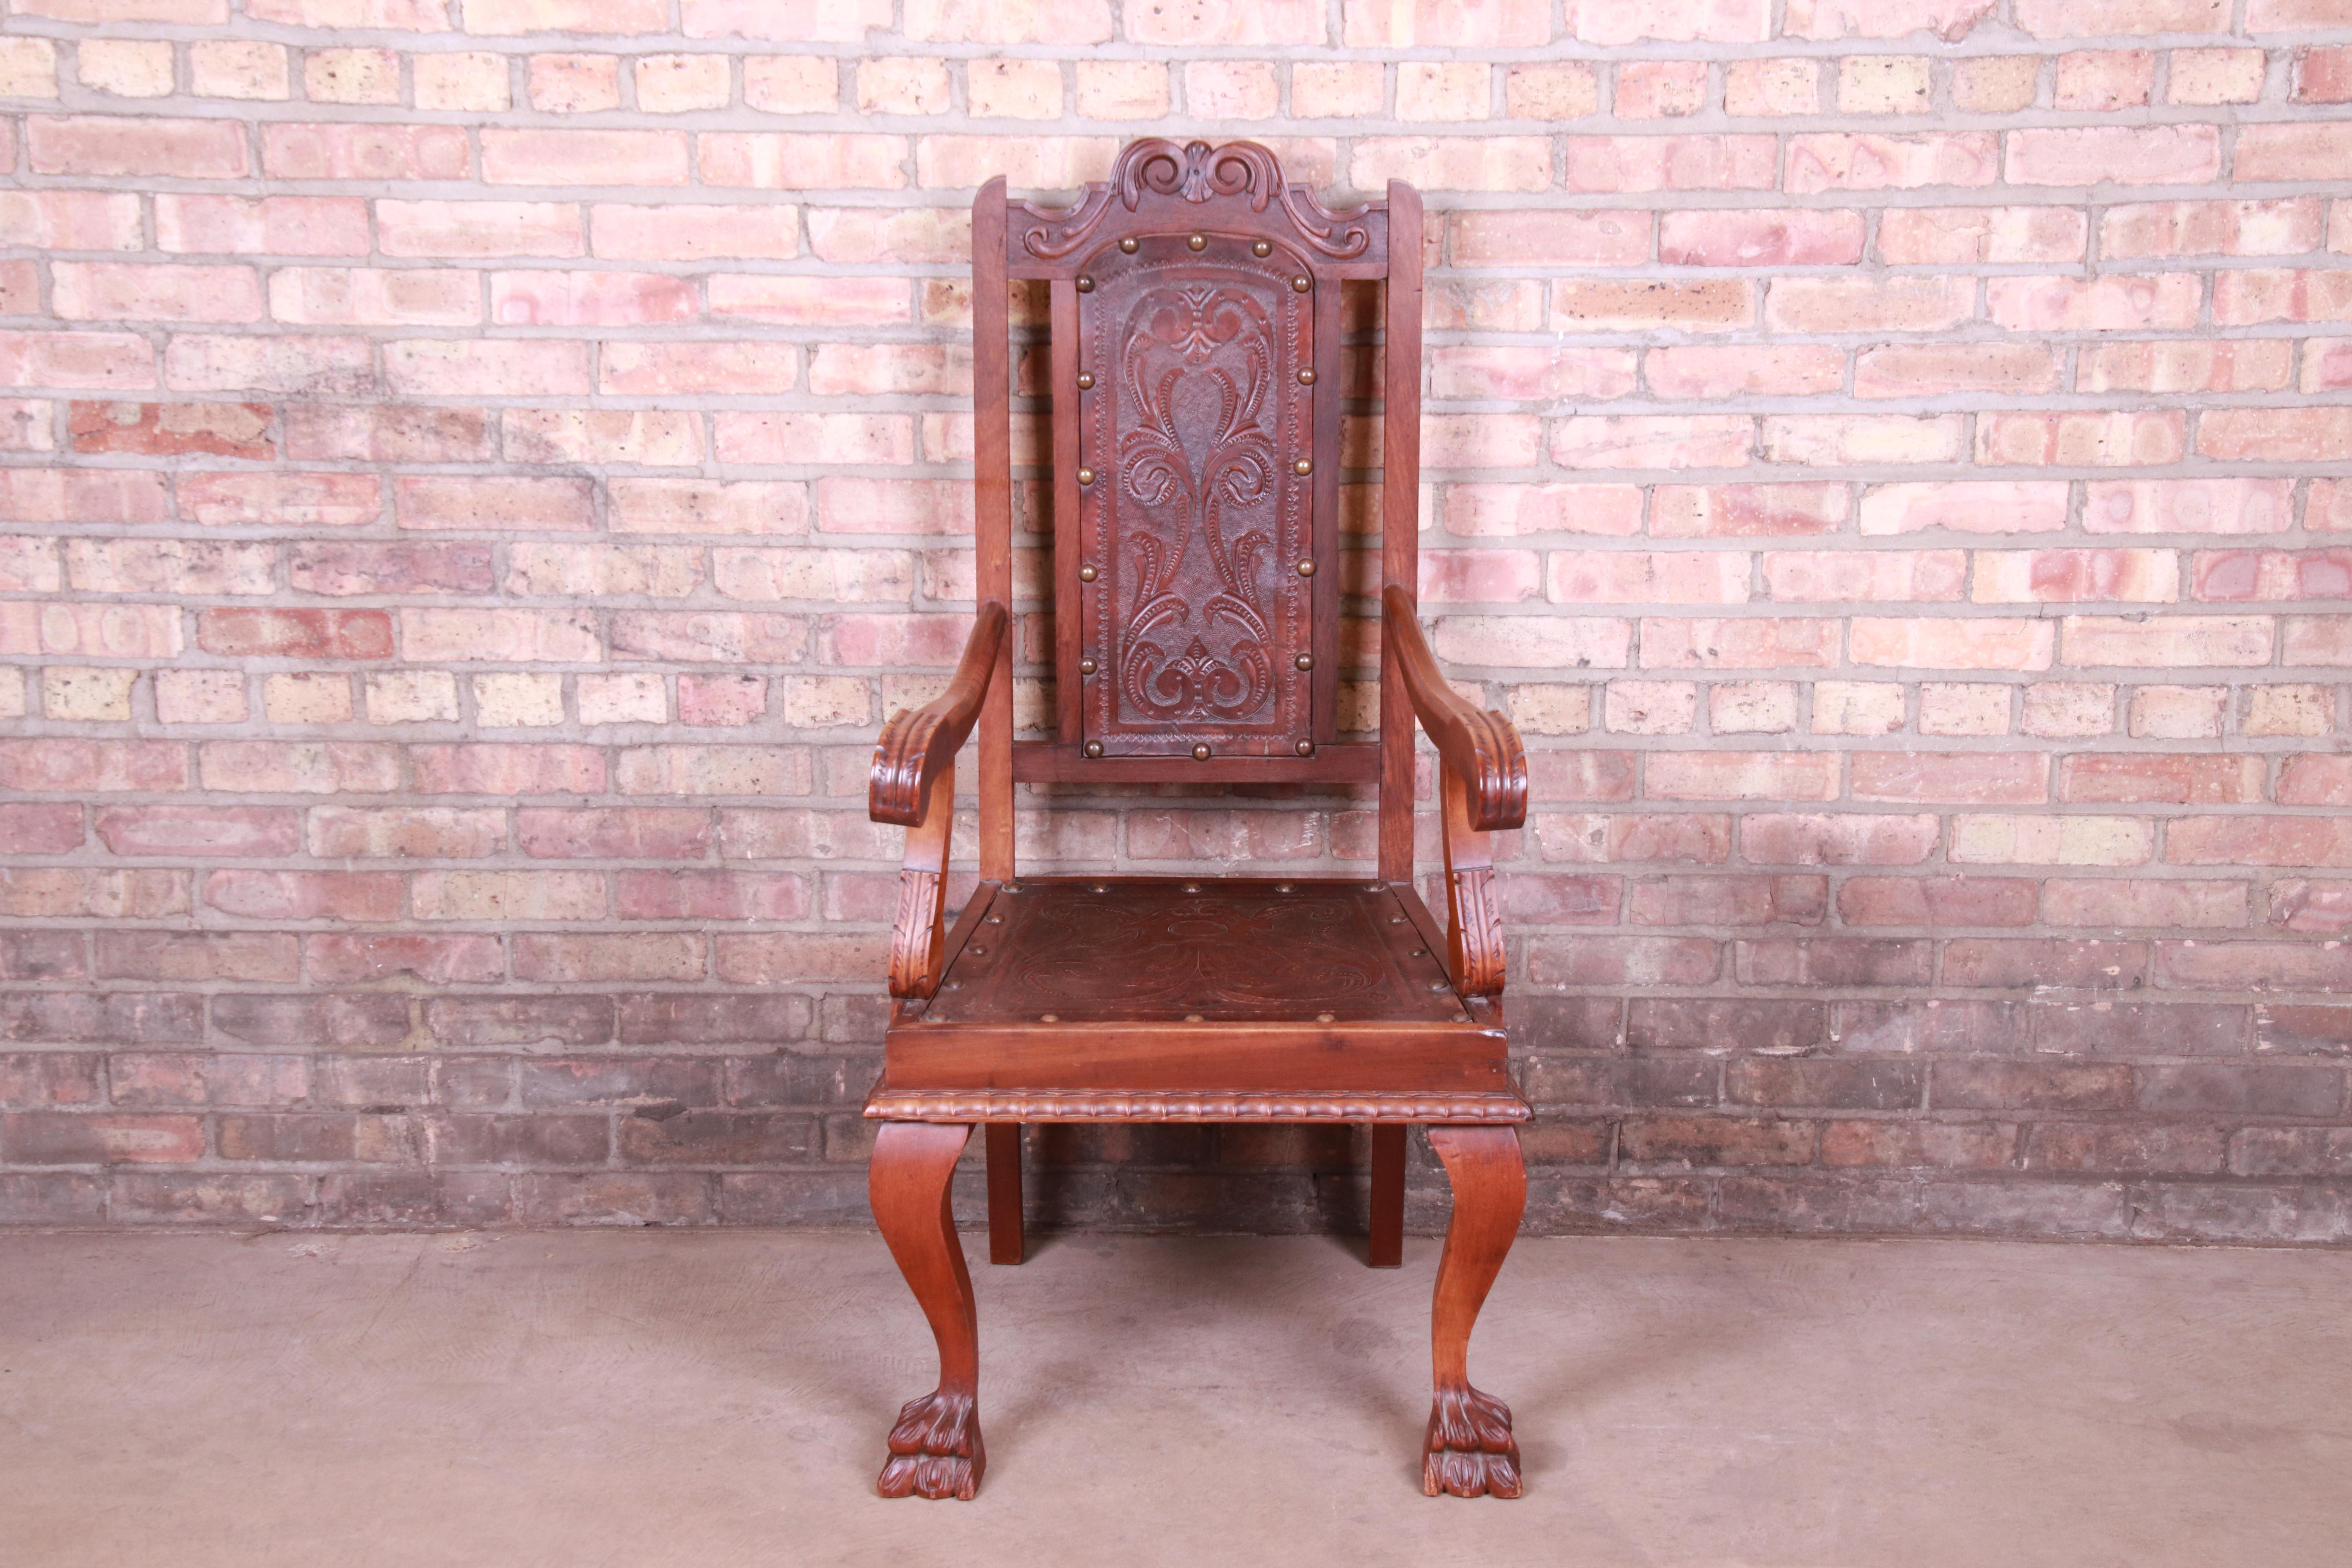 Renaissance Revival Francisco Bergamo Sobrinho Carved Walnut and Embossed Leather Throne Chair